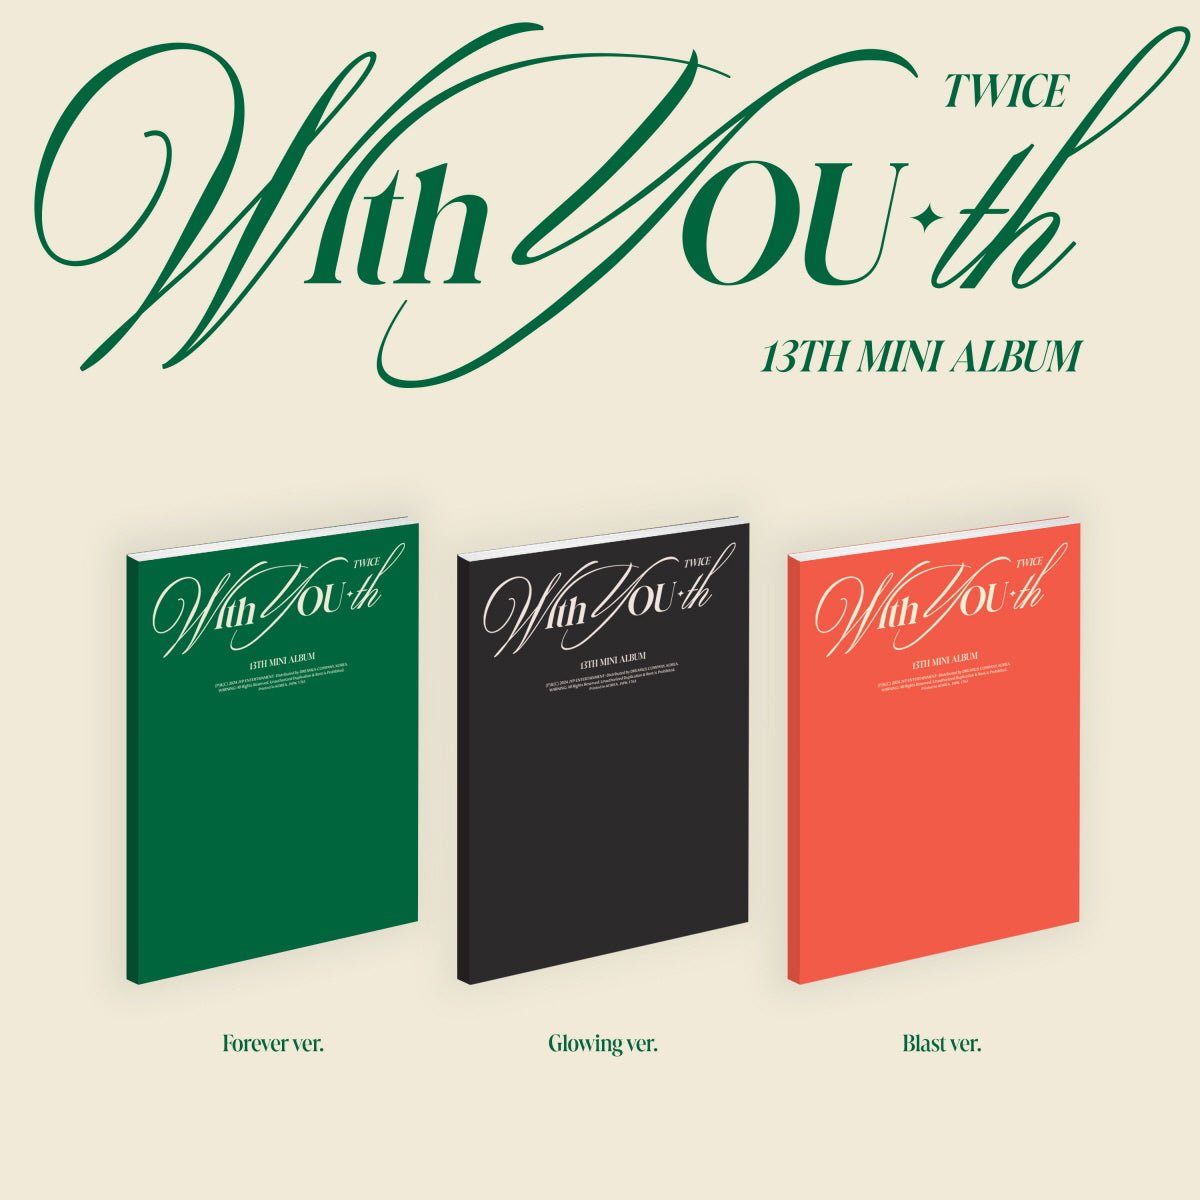 TWICE - 13TH MINI ALBUM [With YOU-th] - KAVE SQUARE